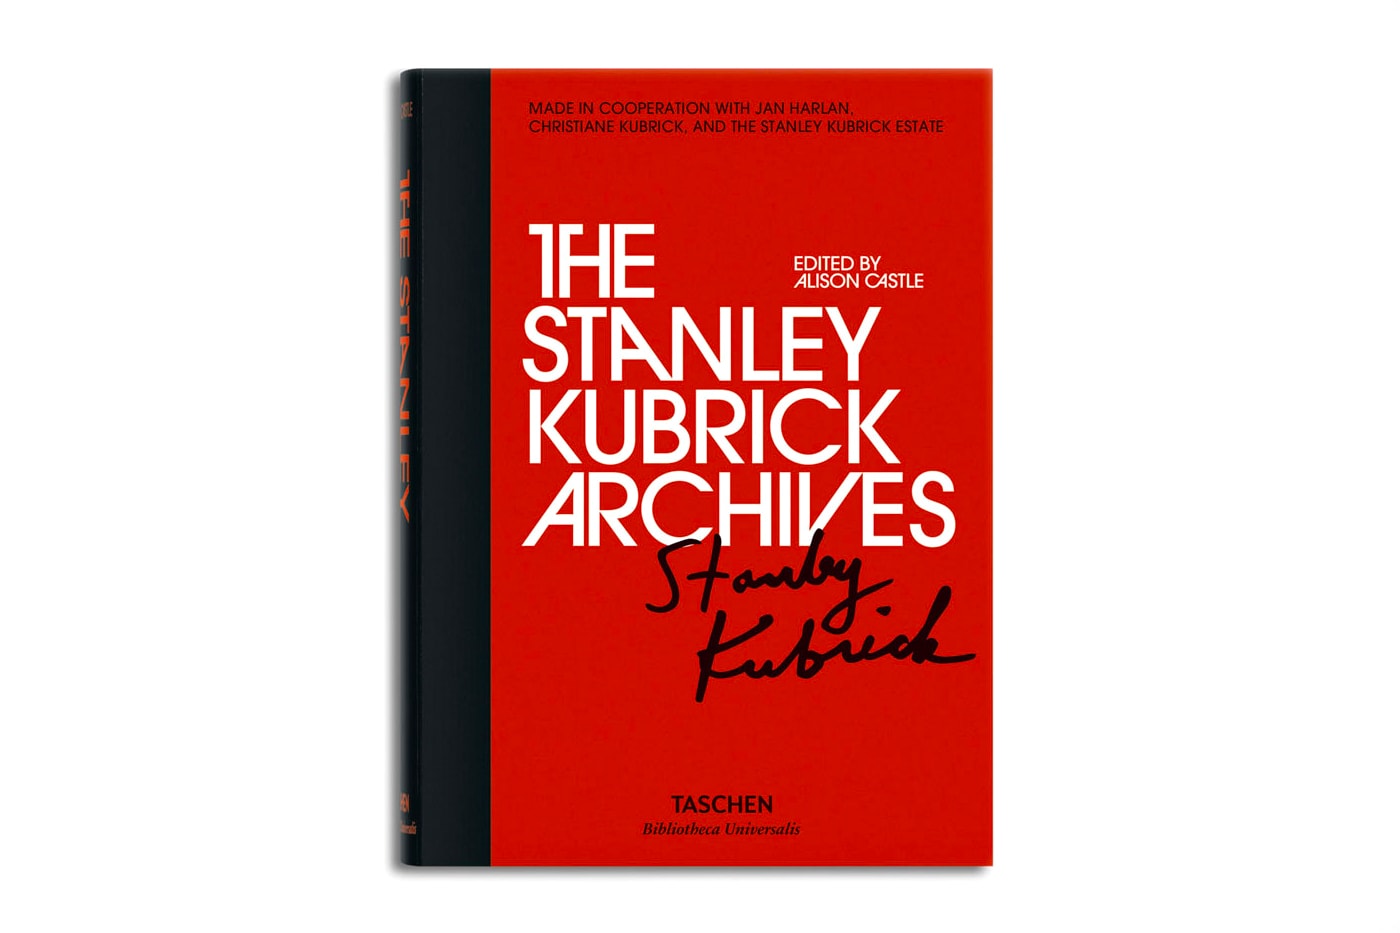 THE STANLEY KUBRICK ARCHIVES Book material cinematic filmmaker chronicle document picture still movies director 2001 a space odyssey clockwork orange